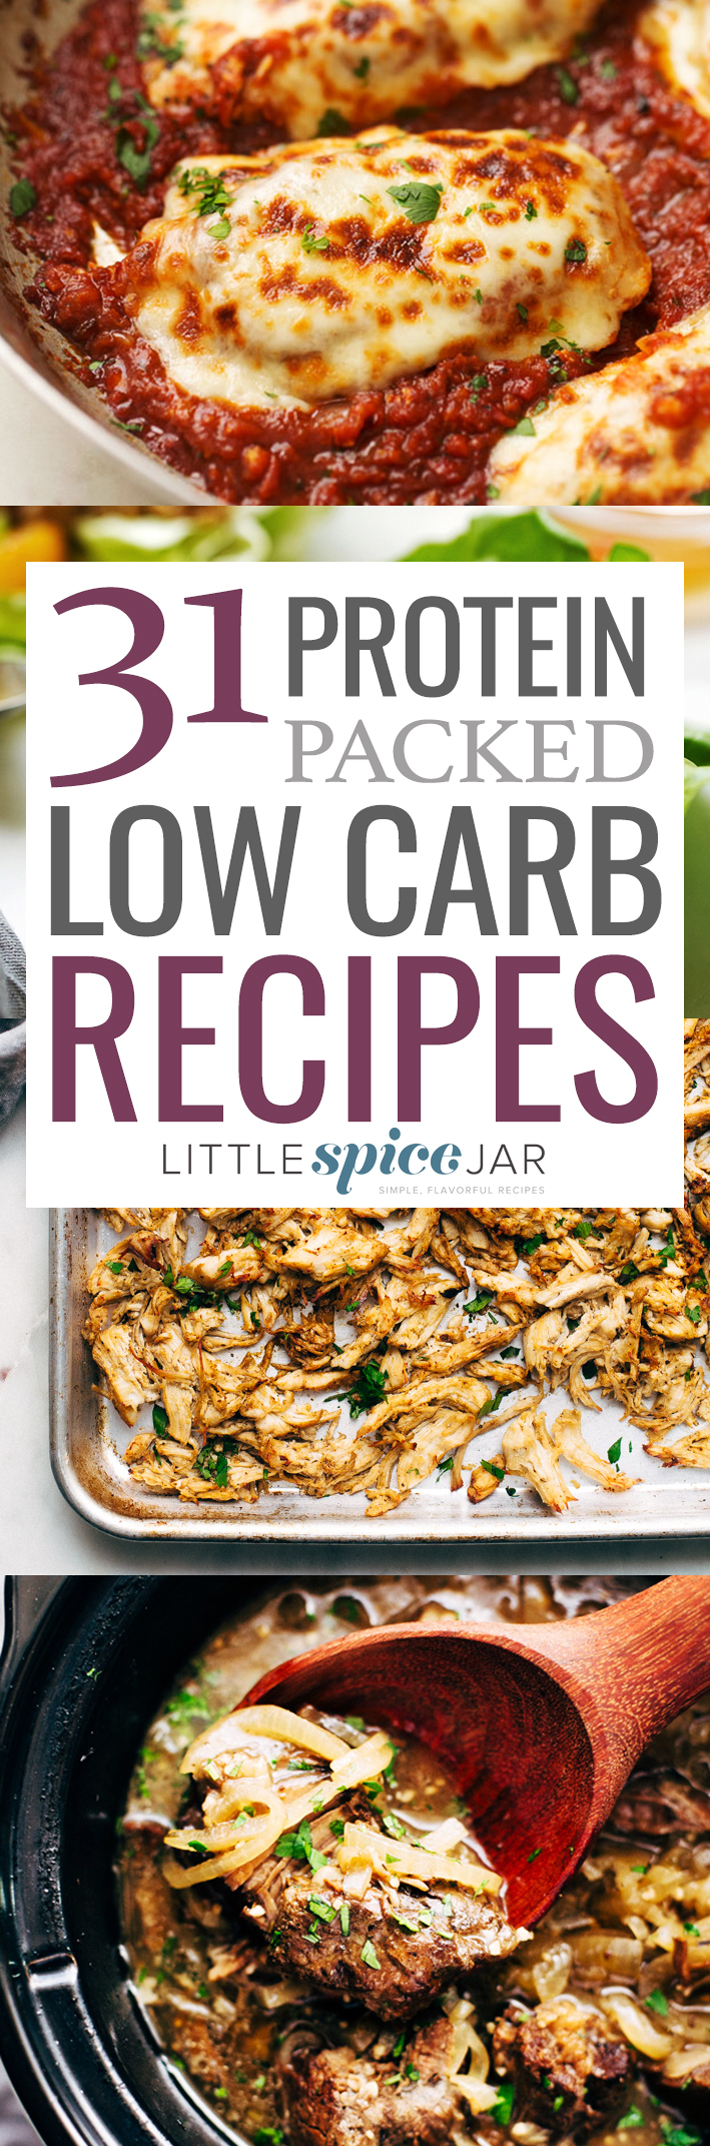 31 Protein Packed Low Carb Recipes Little Spice Jar